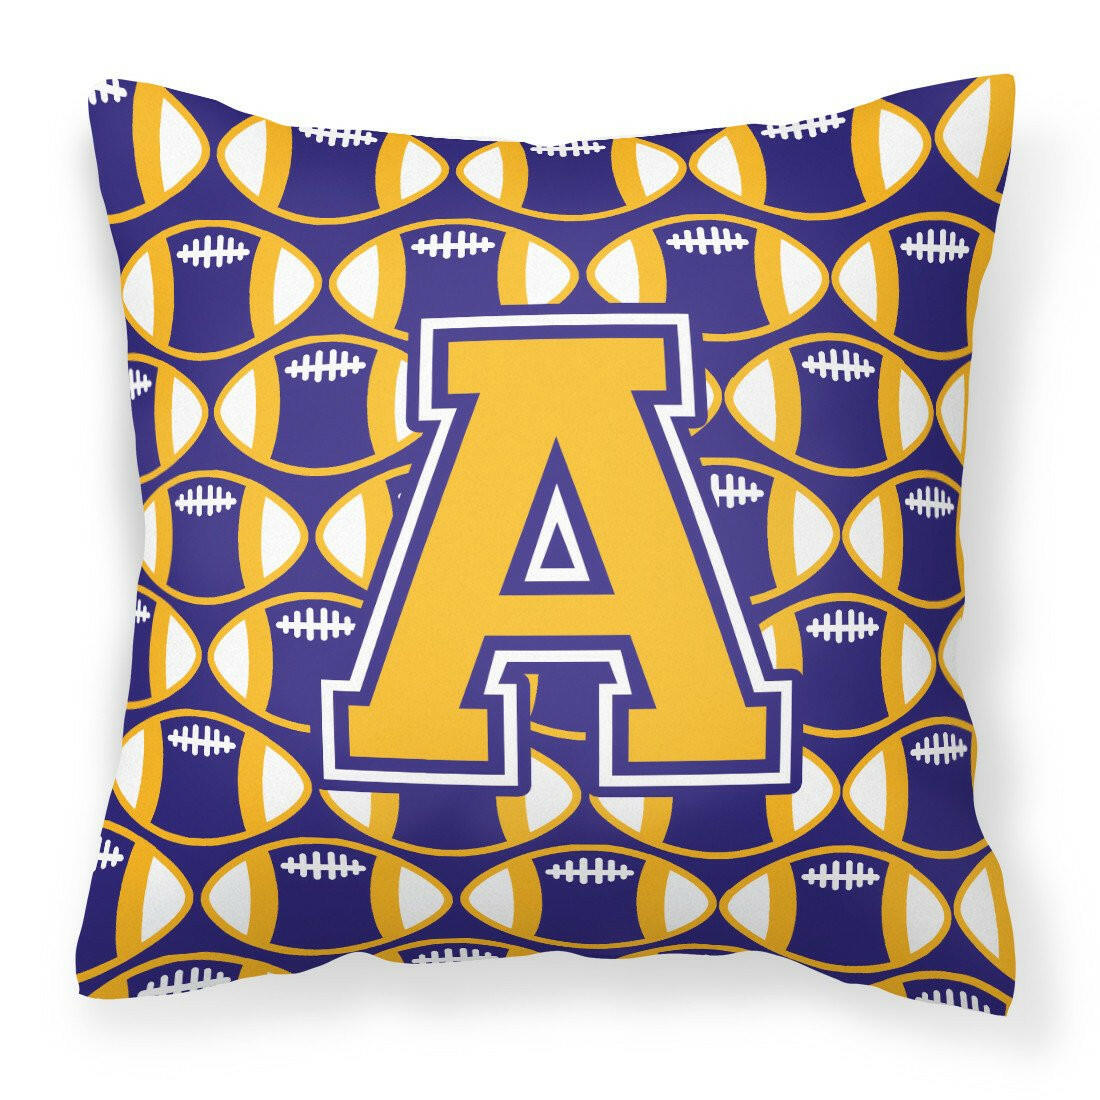 Letter A Football Purple and Gold Fabric Decorative Pillow CJ1064-APW1414 by Caroline's Treasures